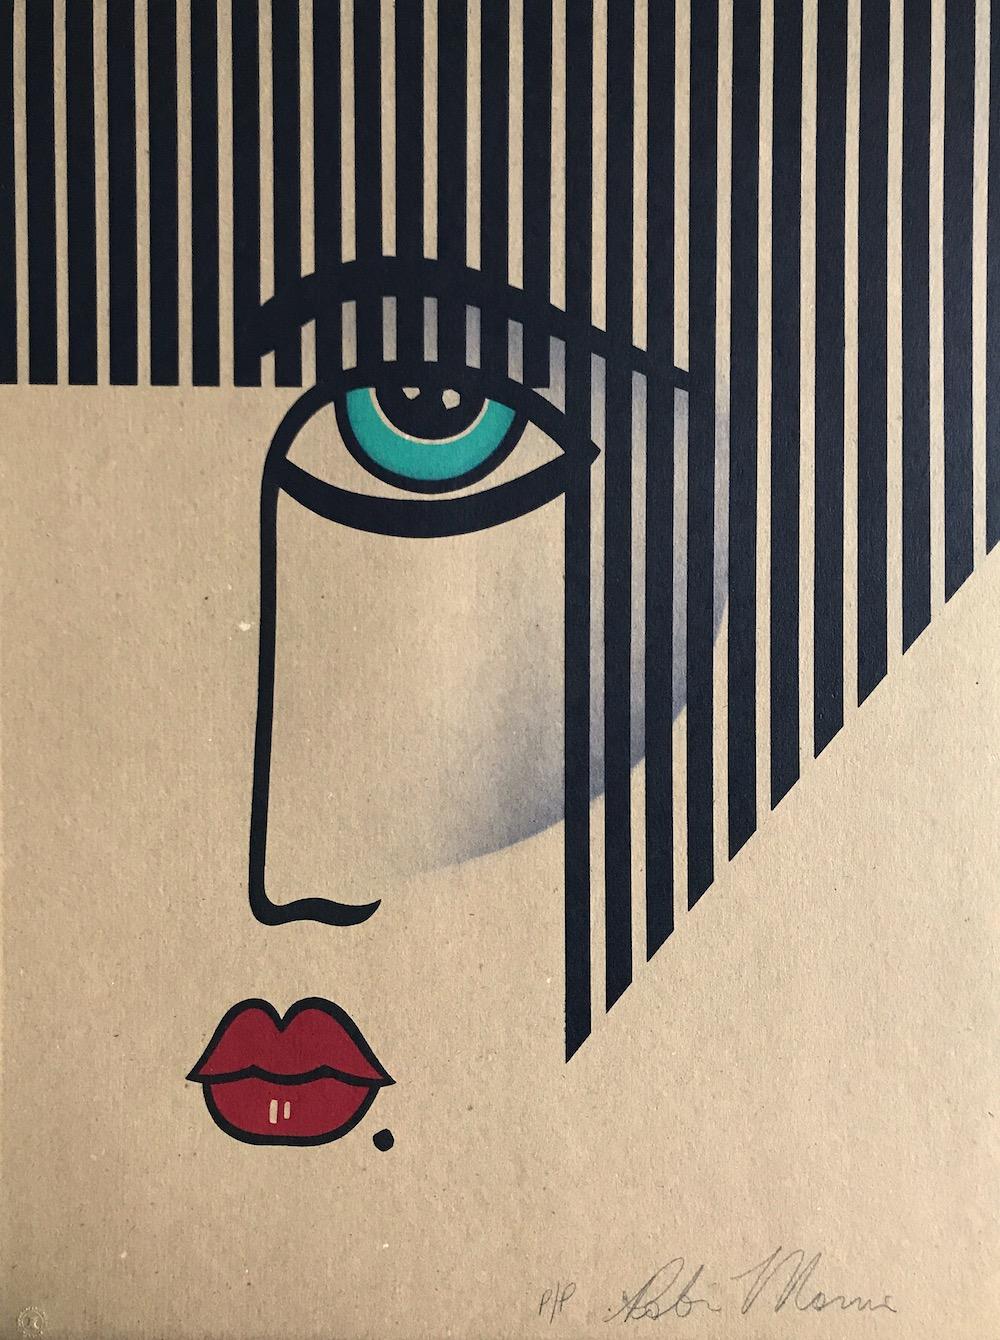 Robin Morris Print - NEW DECO Signed Lithograph, Modern Face Portrait on Brown Paper, Black Stripes